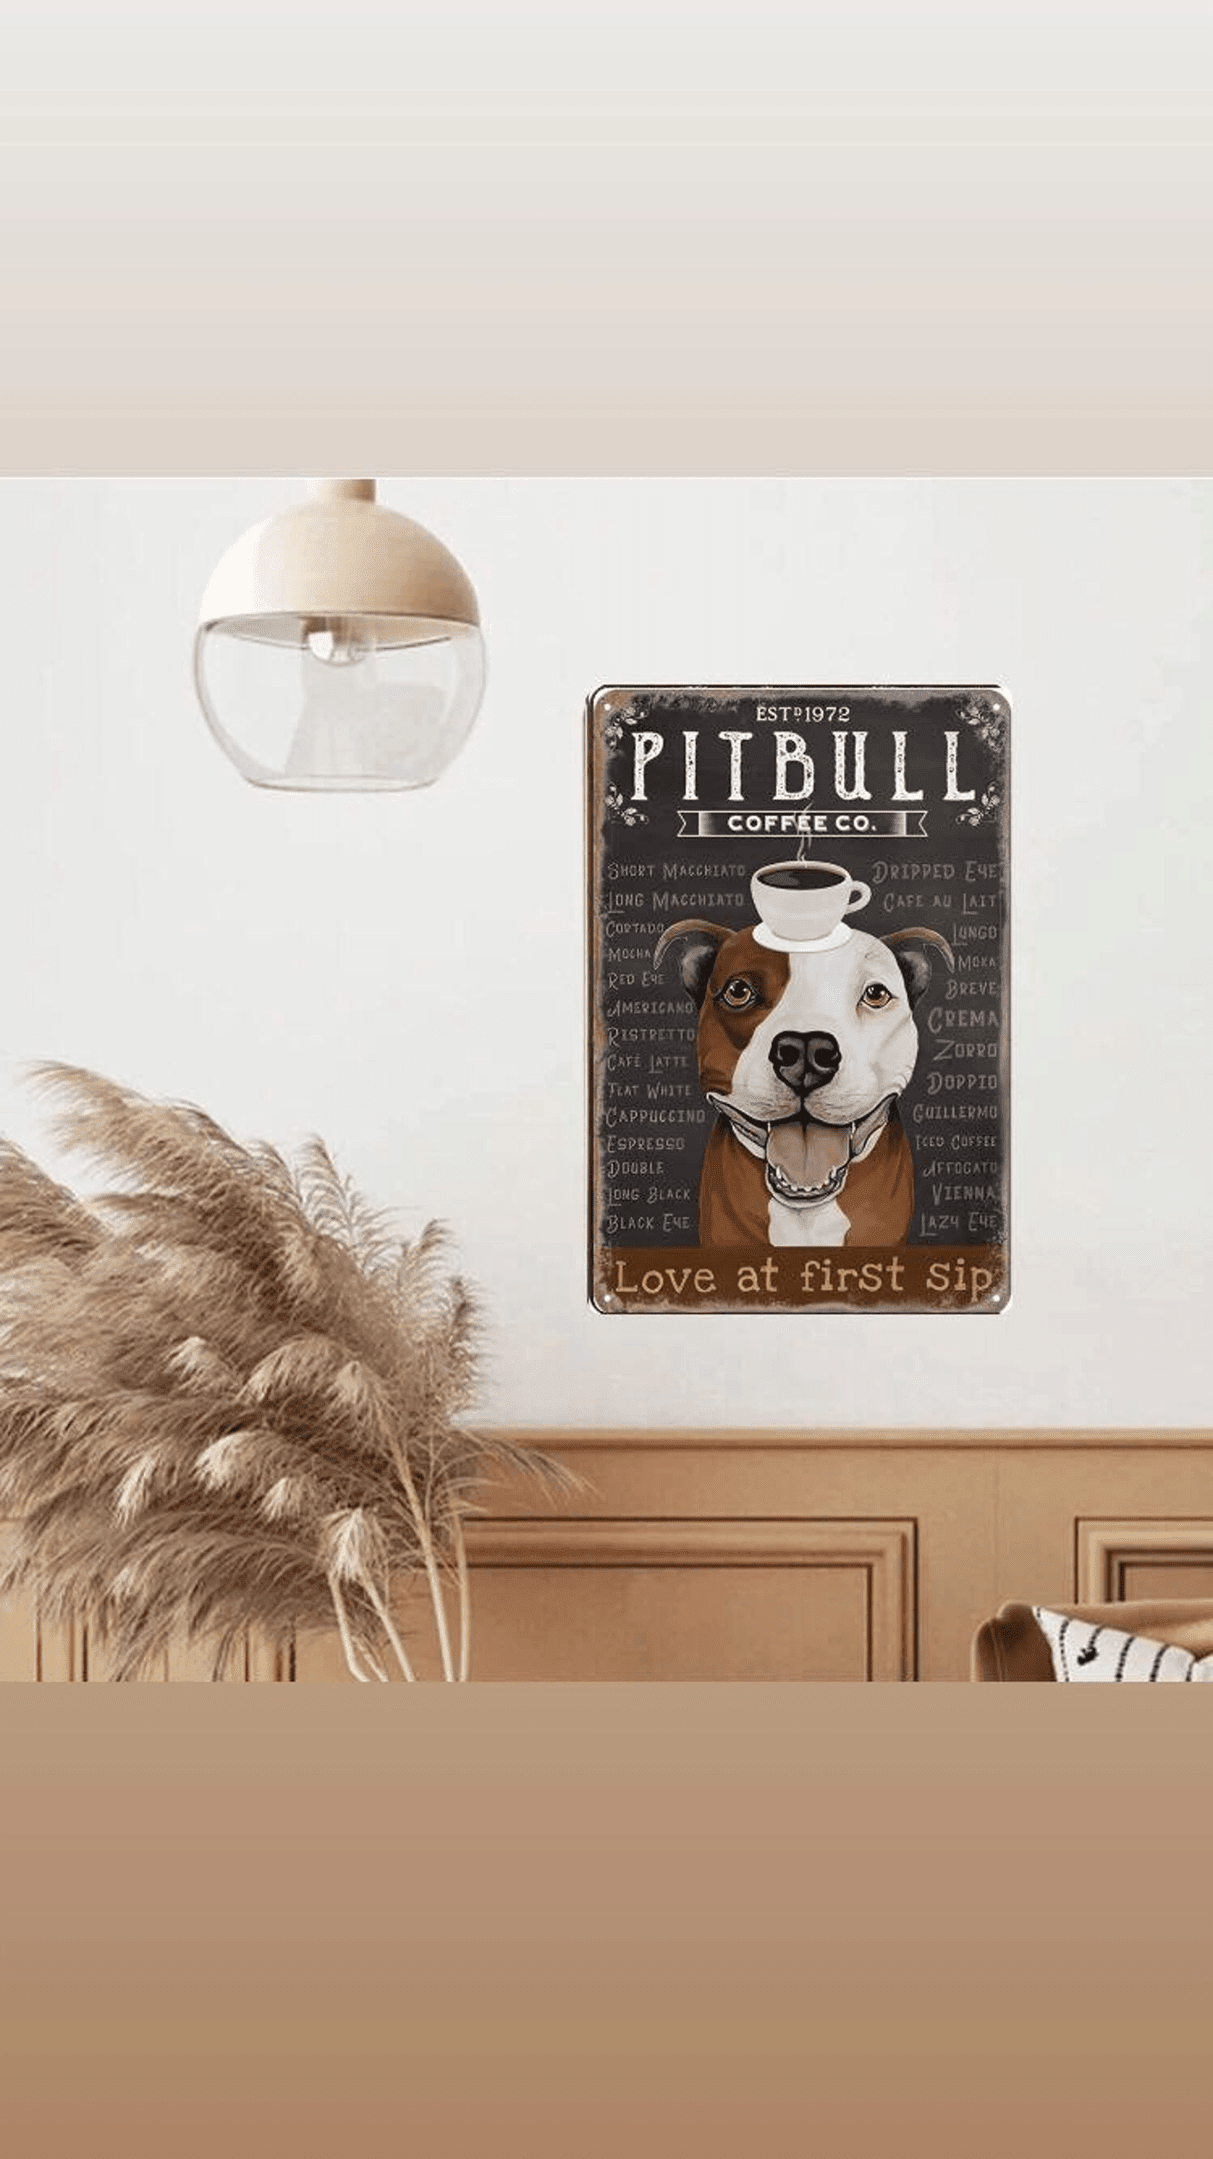 Retro Tin Sign | Pitbull Coffee Co Love at First Sip Est. 1972 Sign | Dog Art Poster Dogs Lovers Vintage Bar Cafe Art Wall Decor  in